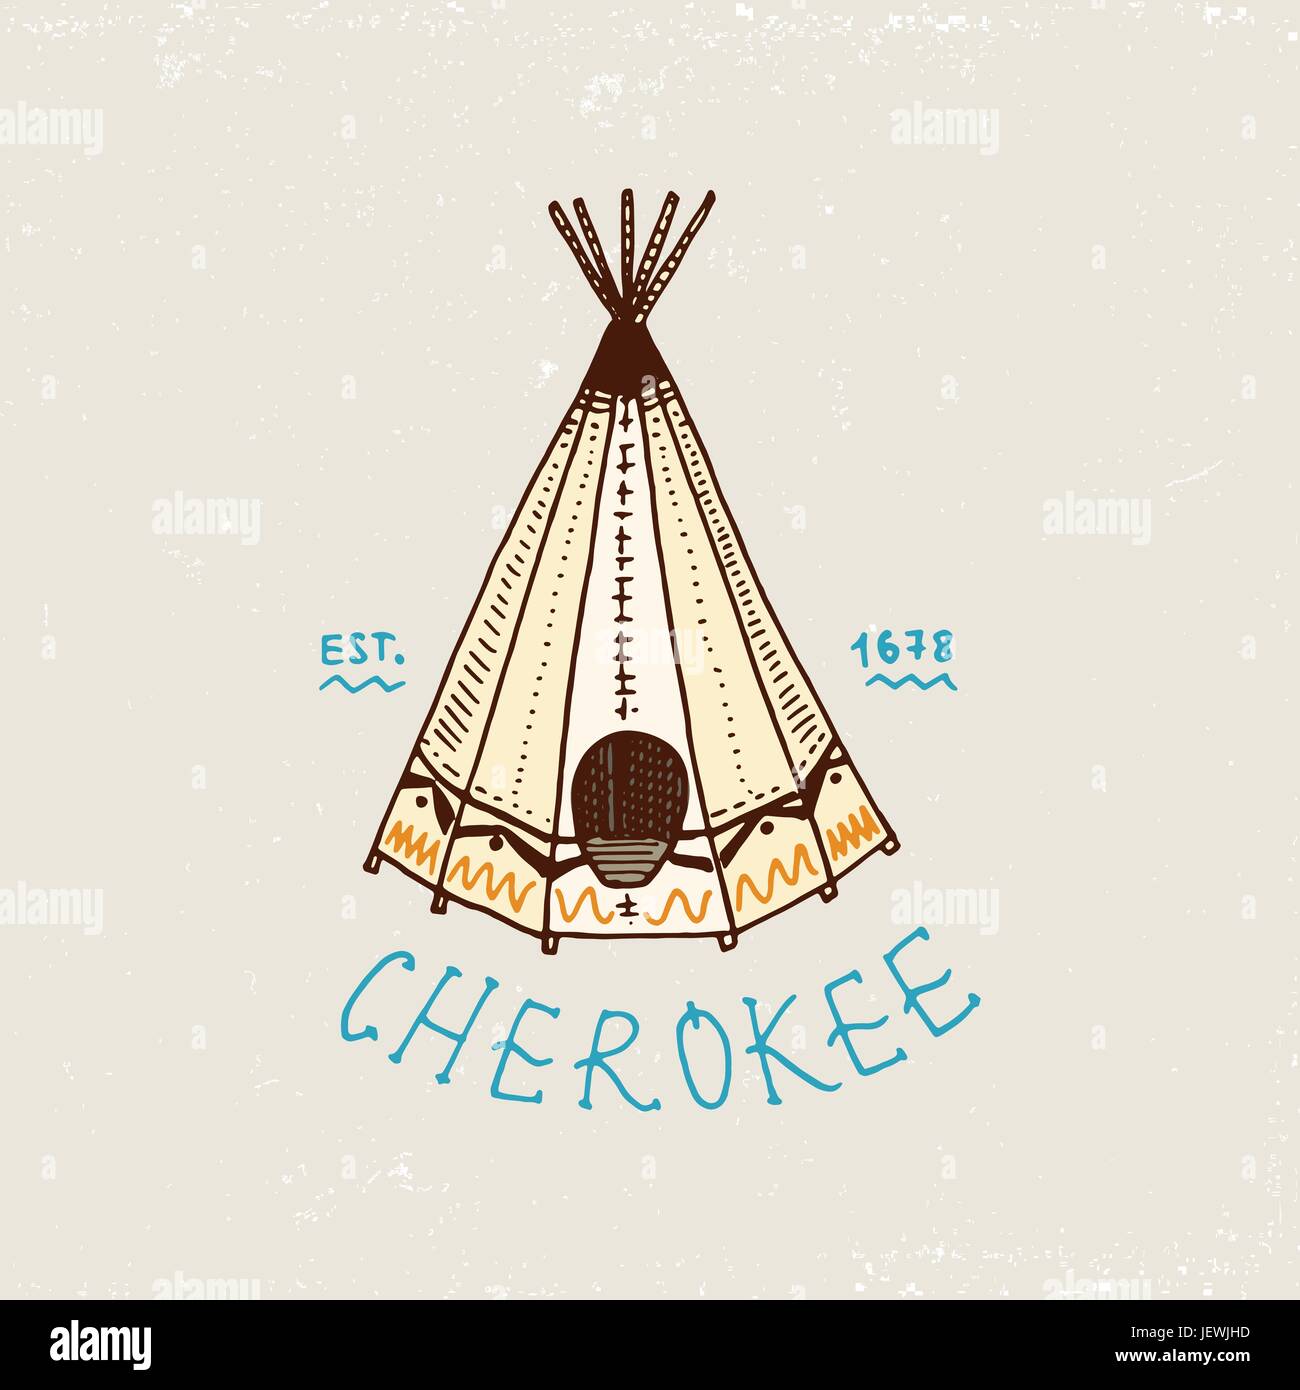 set of engraved vintage, hand drawn, old, labels or badges for indian or native american, tent. Stock Vector